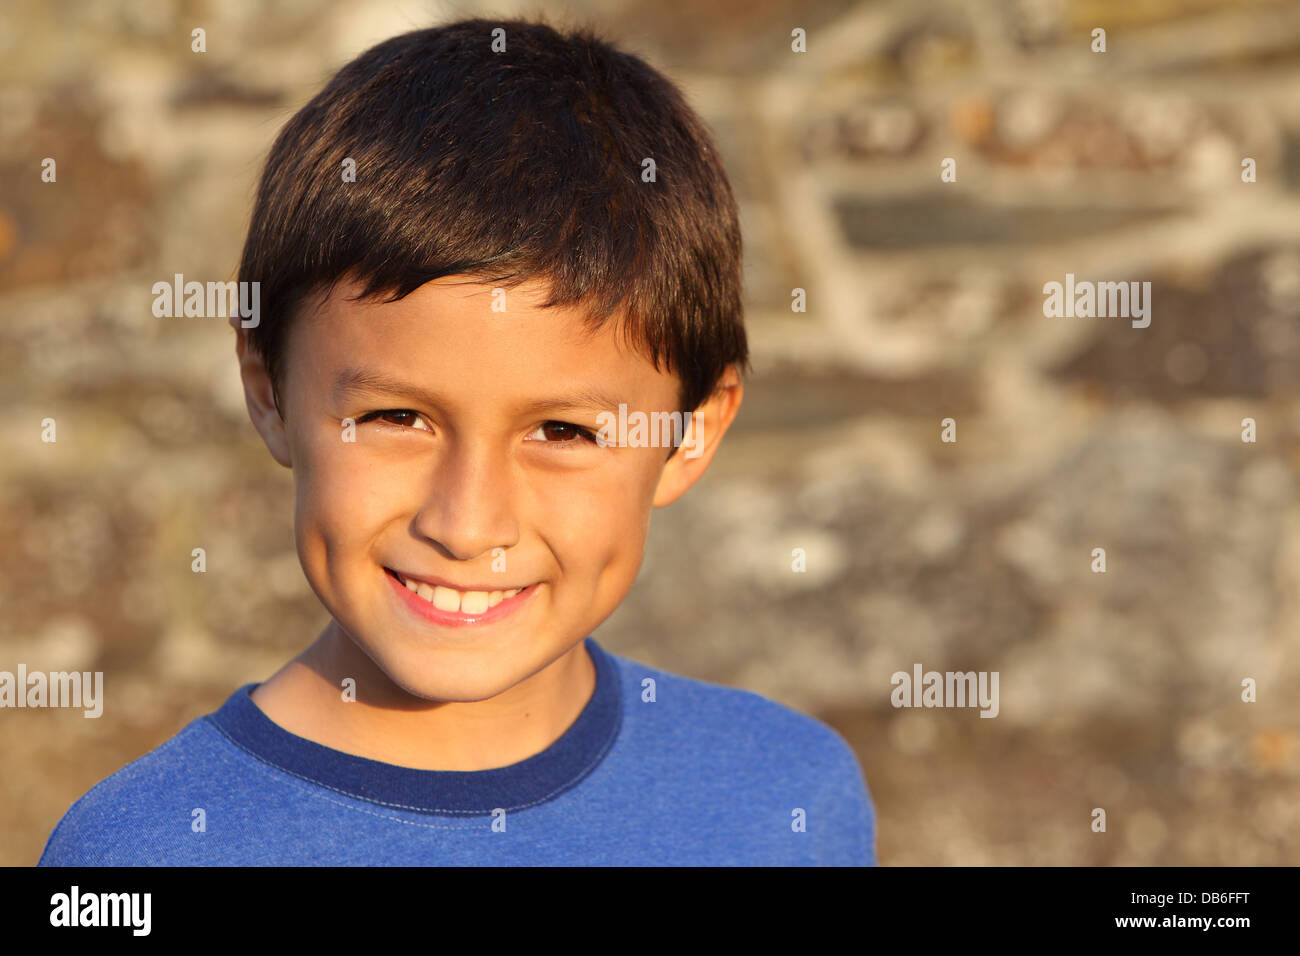 Portrait of a young smiling boy near sunset by an old wall Stock Photo